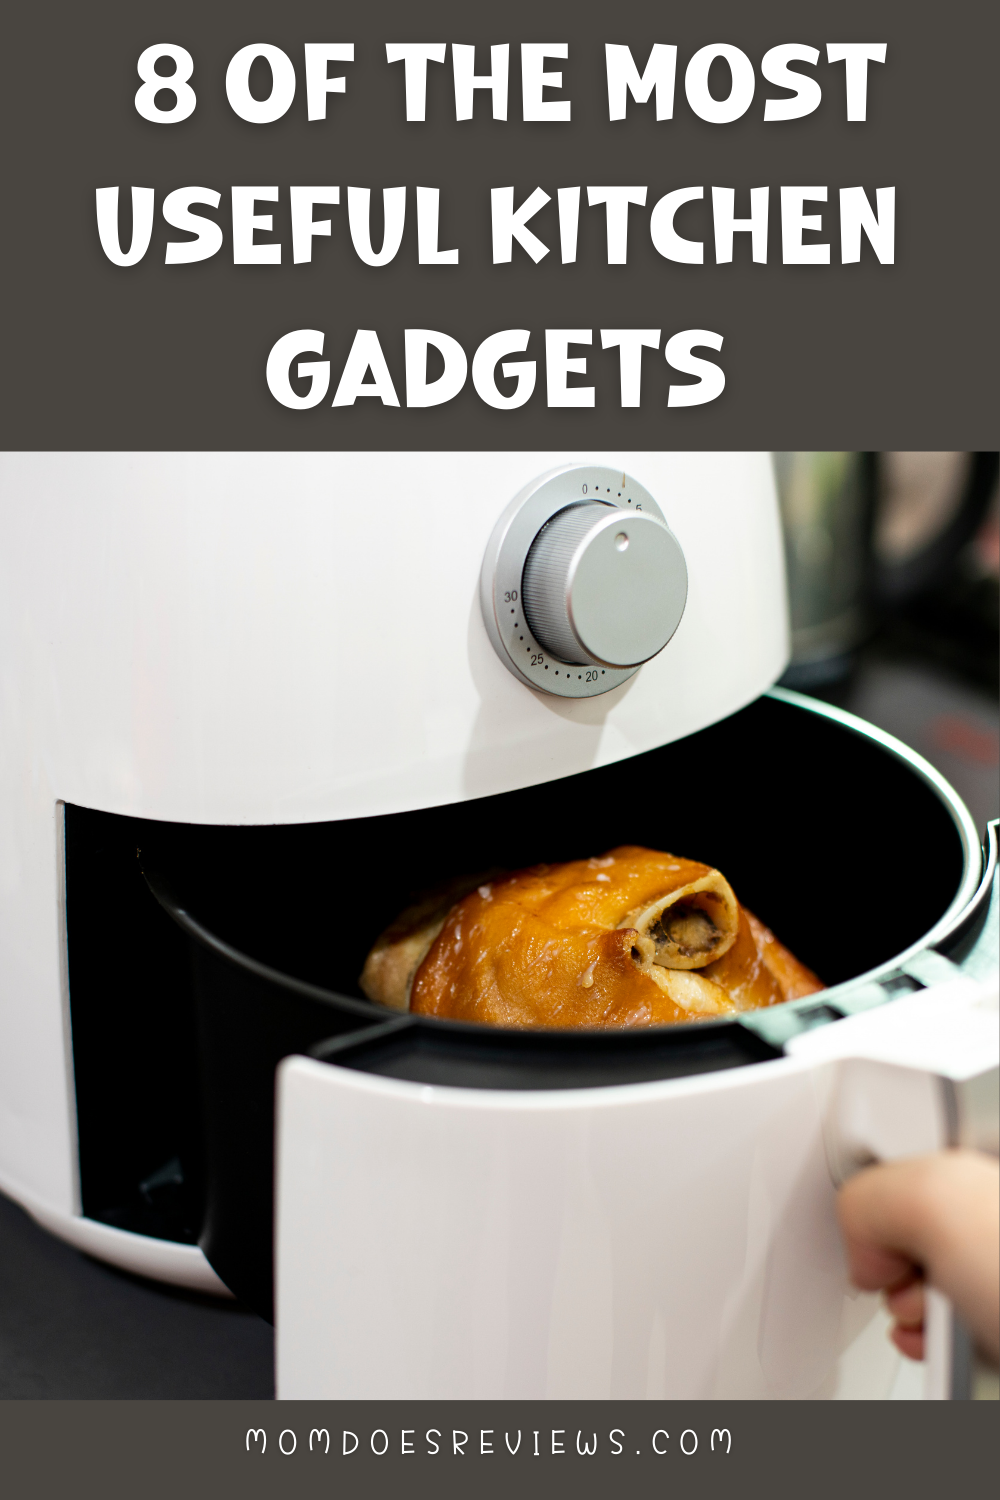  8 of the Most Useful Kitchen Gadgets